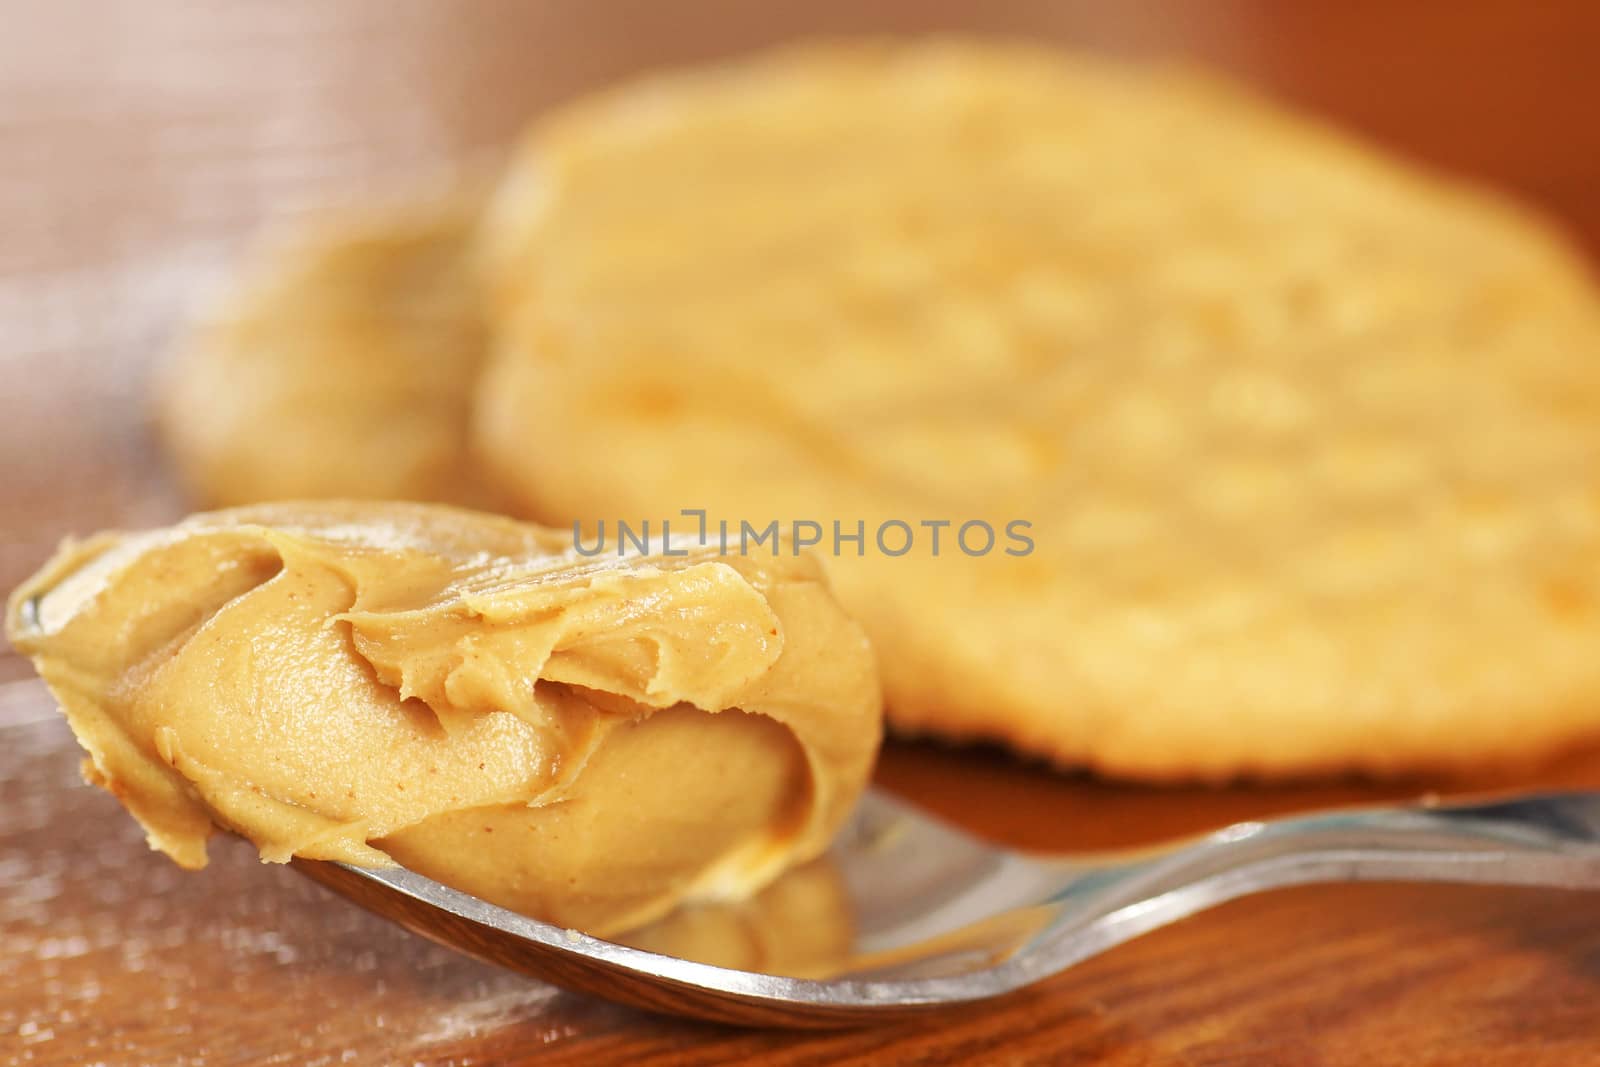 Spoon full with smooth peanut butter, cookies in the background on wooden table.